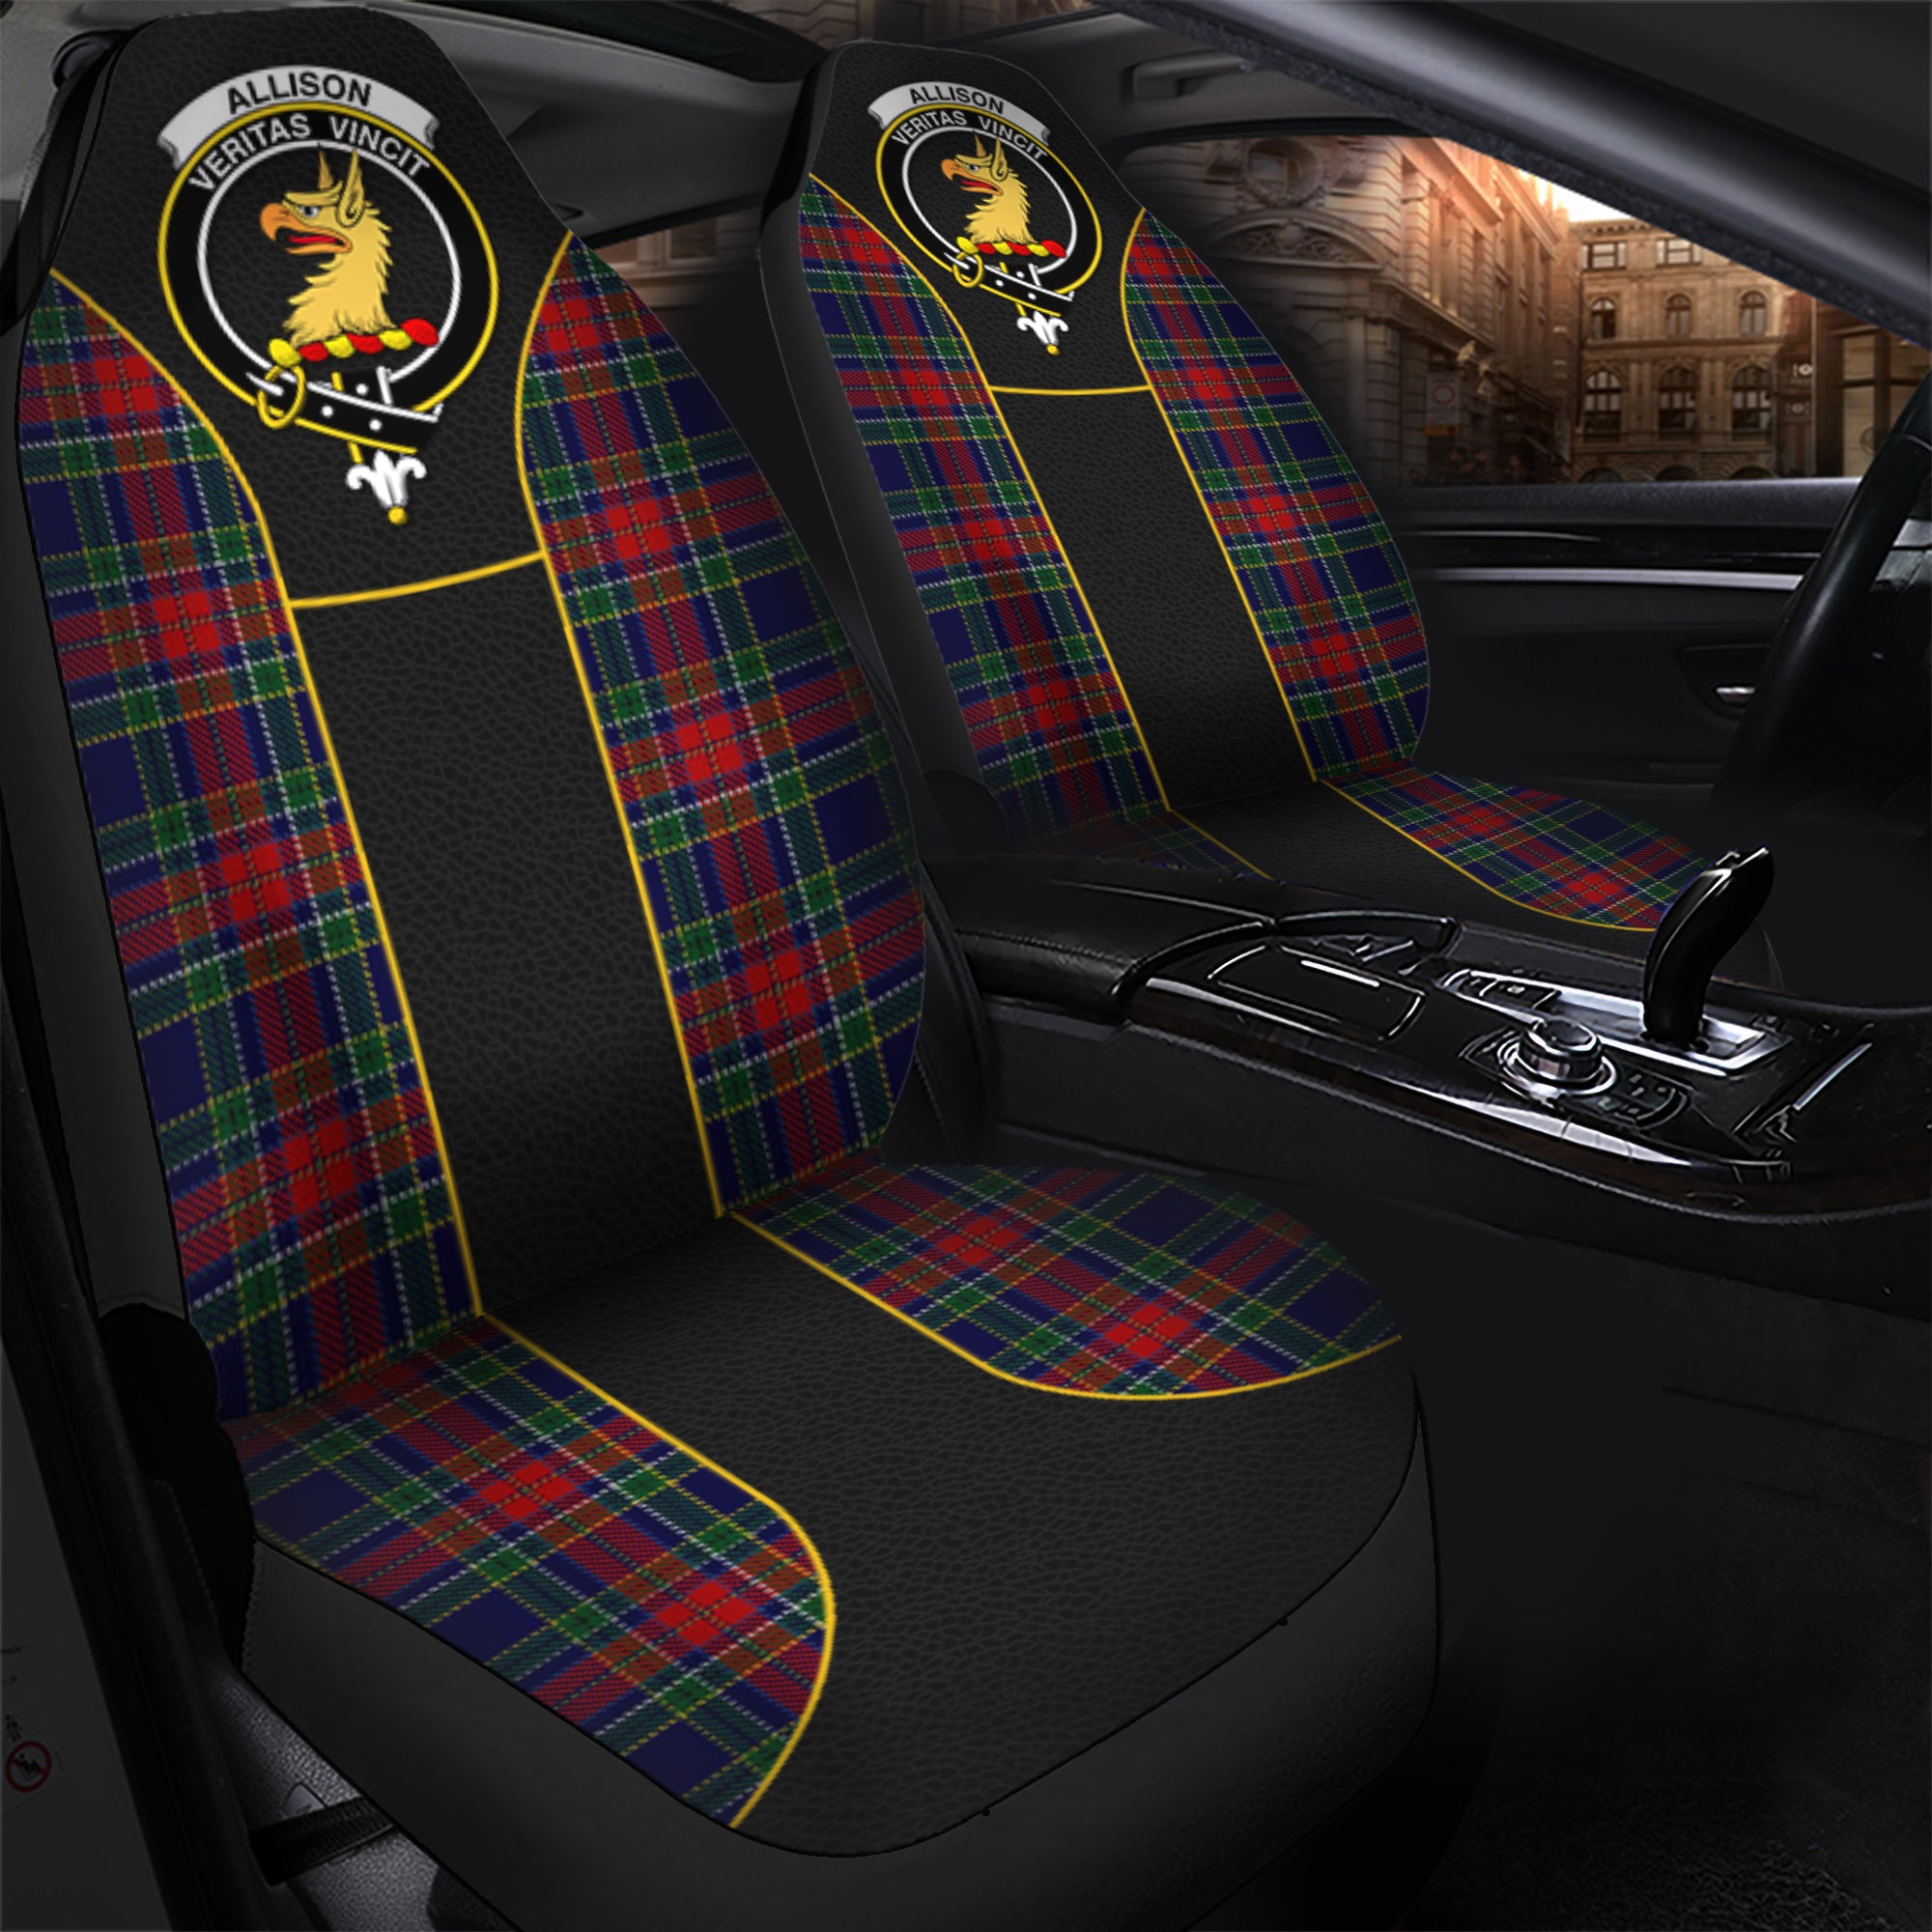 scottish-allison-red-tartan-crest-car-seat-cover-special-style